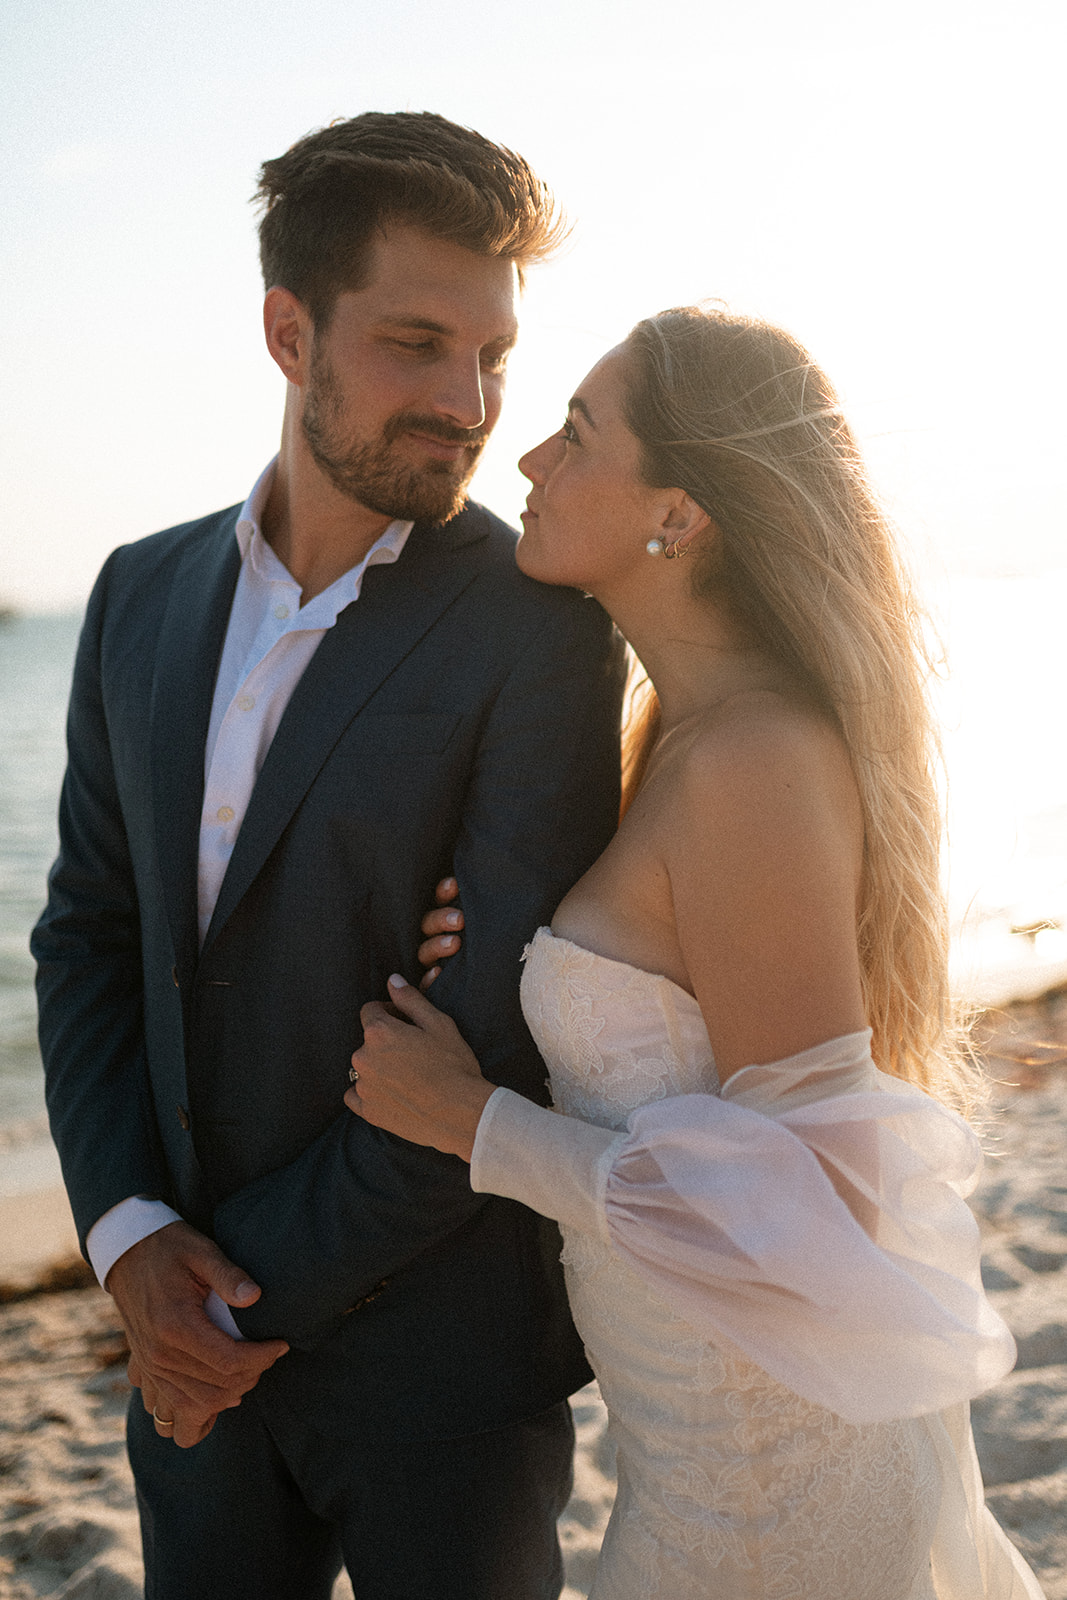 A couple who took their bridal portraits on the beach catch the most amazing sunset